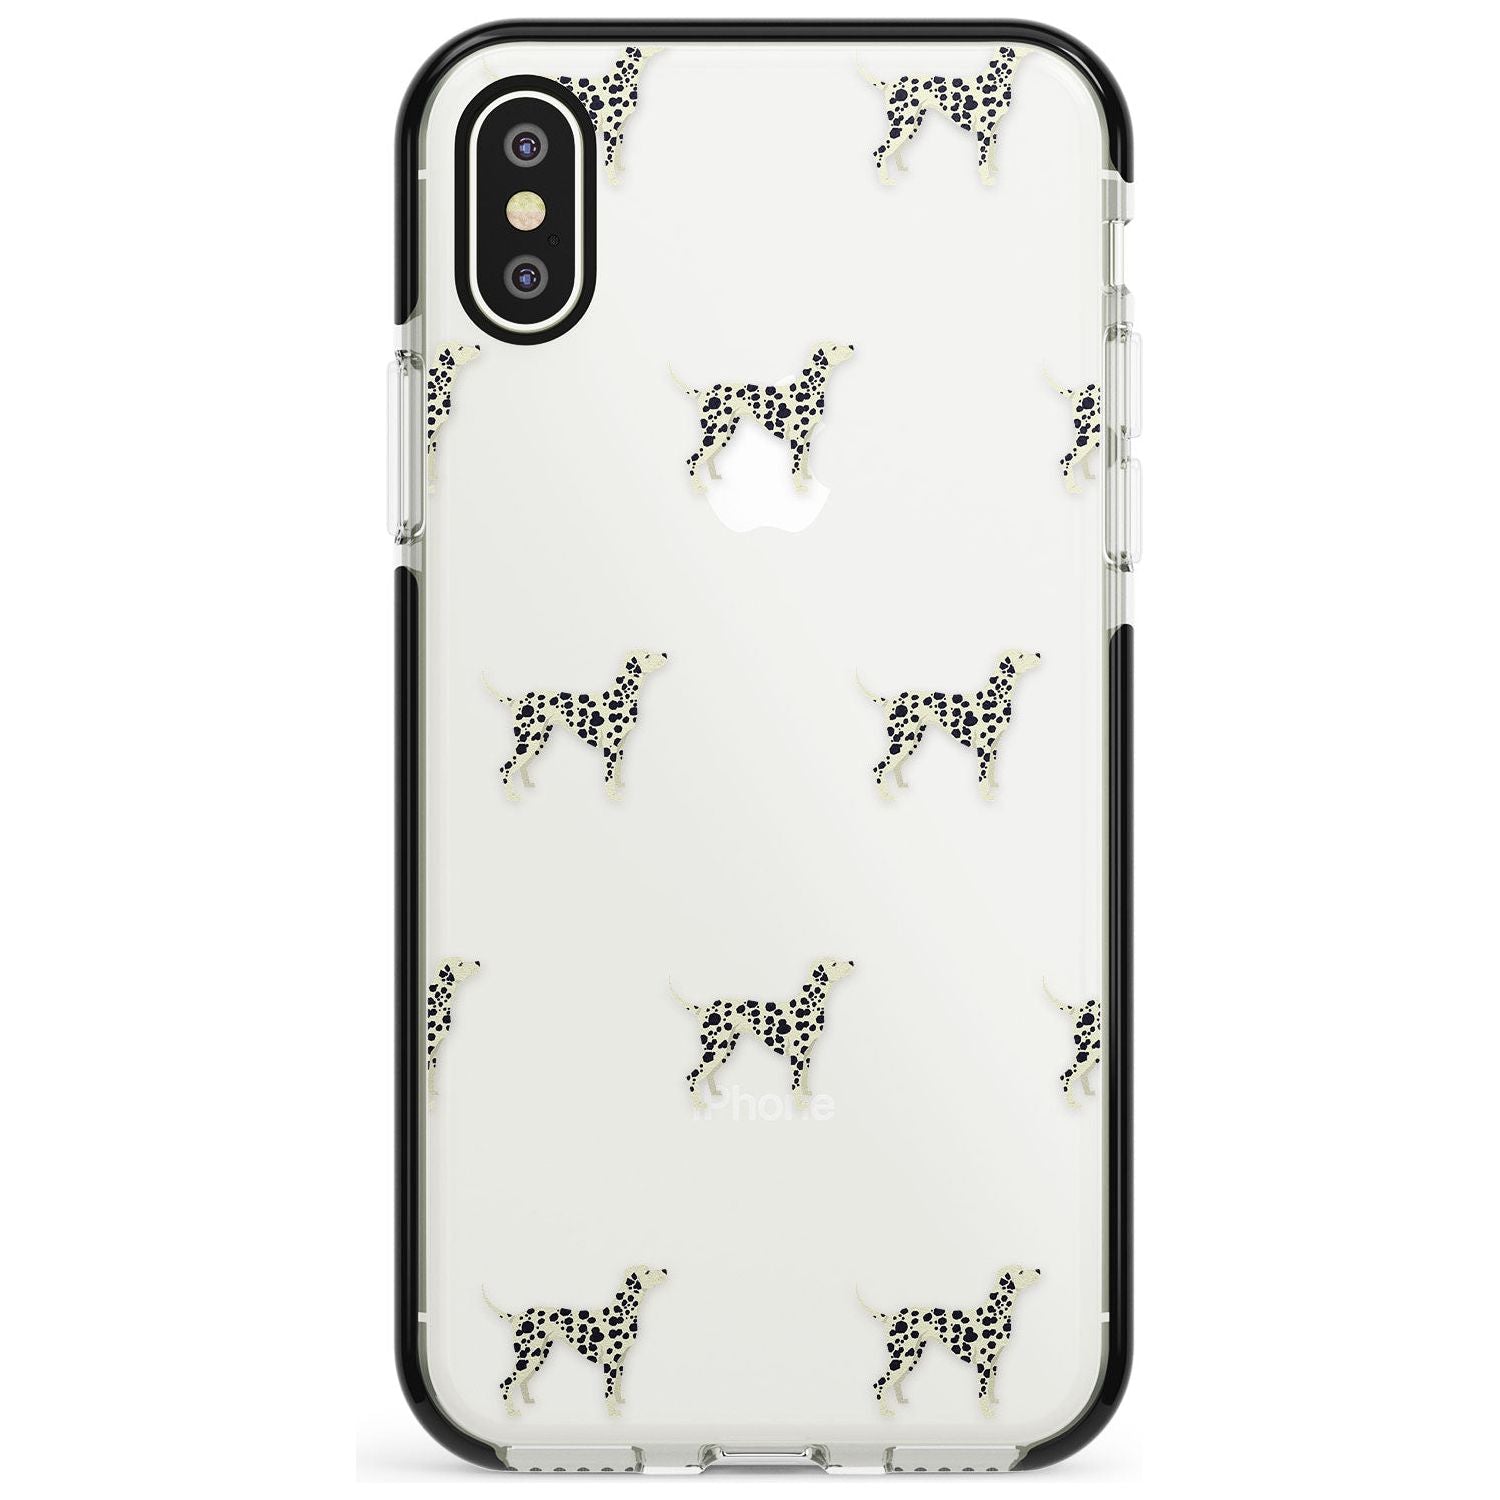 Dalmation Dog Pattern Clear Black Impact Phone Case for iPhone X XS Max XR